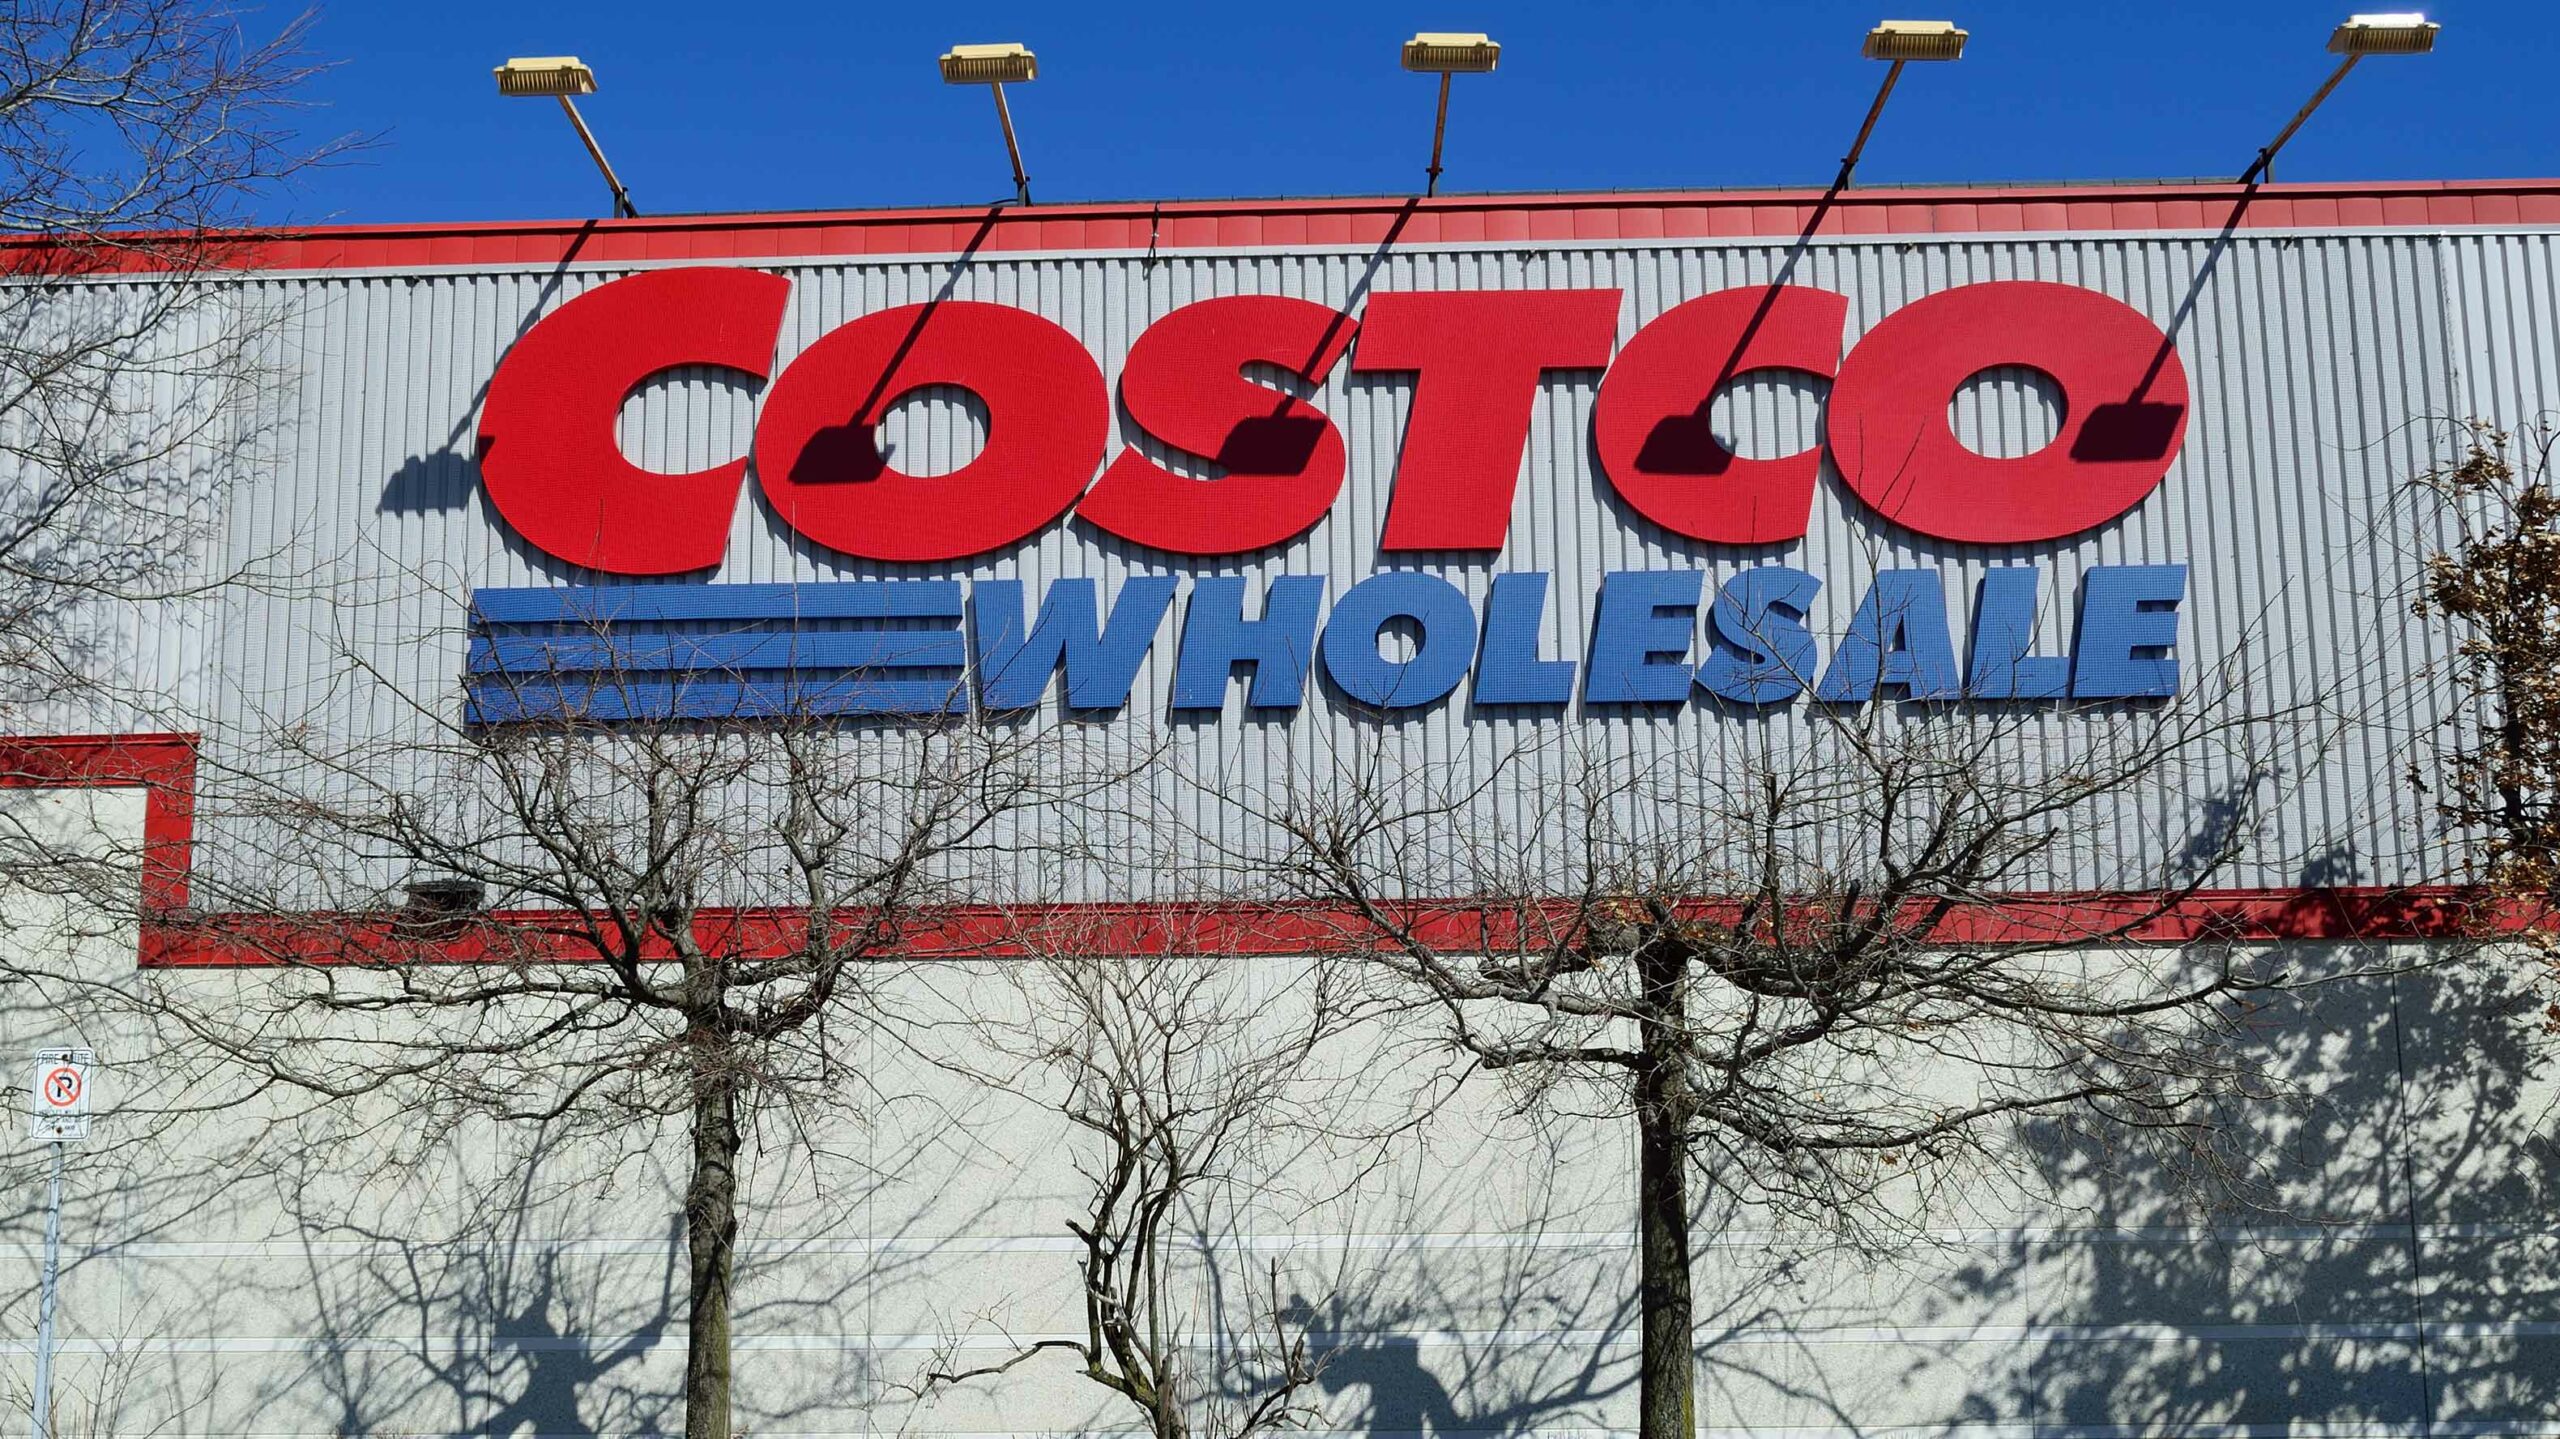 Costco selling $50 Apple App Store gift cards for $43